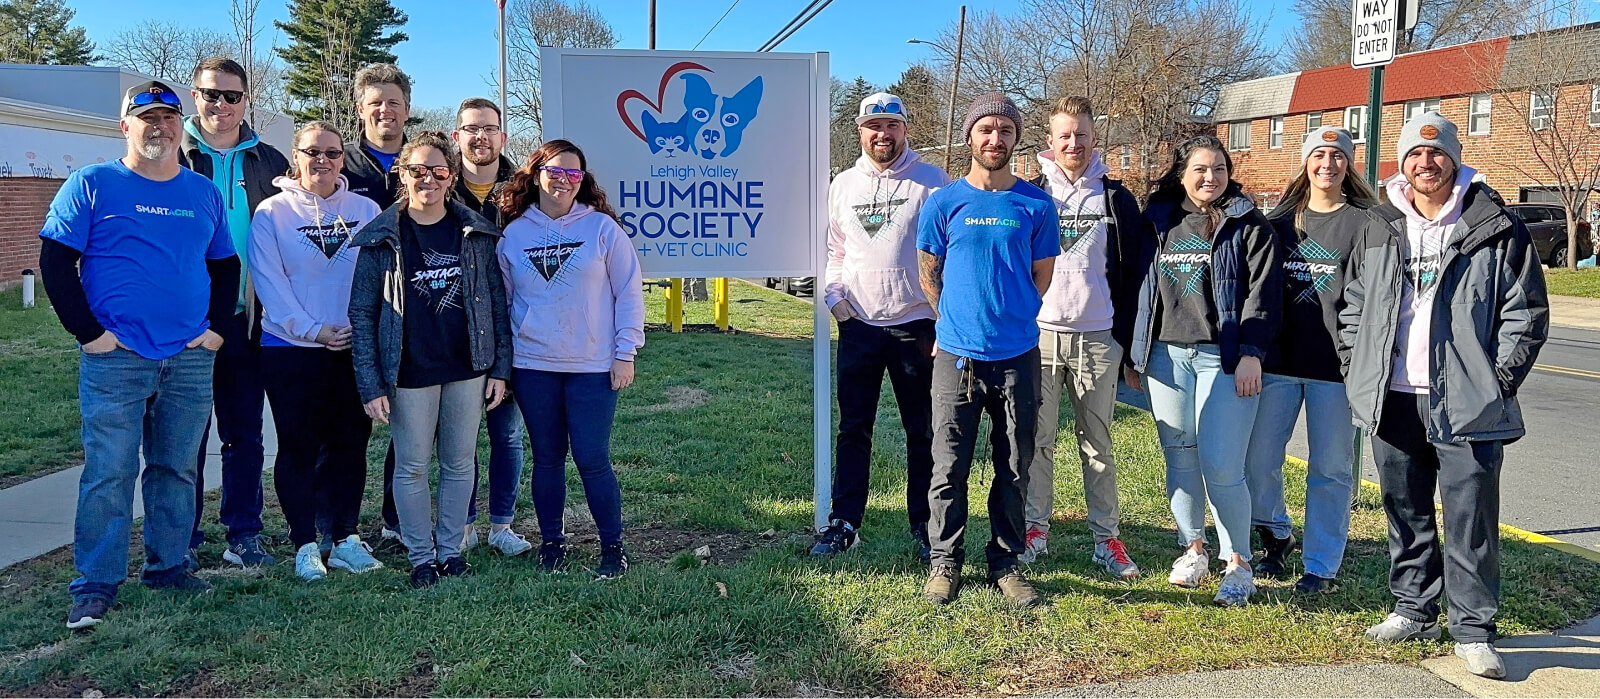 image description: group of people in front of Lehigh Valley Humane Society sign